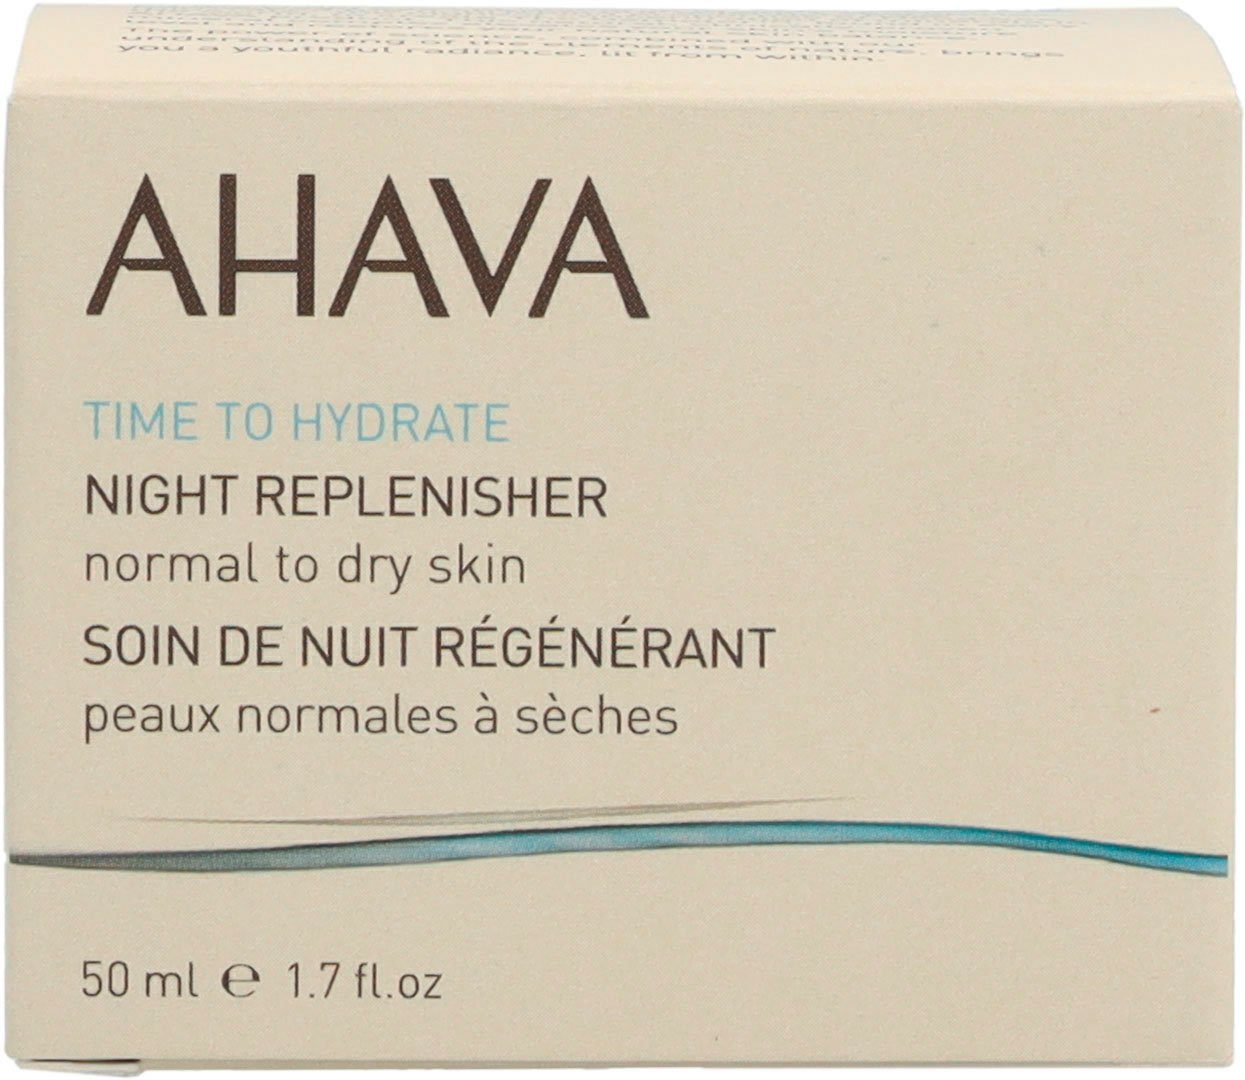 Nachtcreme AHAVA Hydrate Normal Night Replenisher Dry To Time